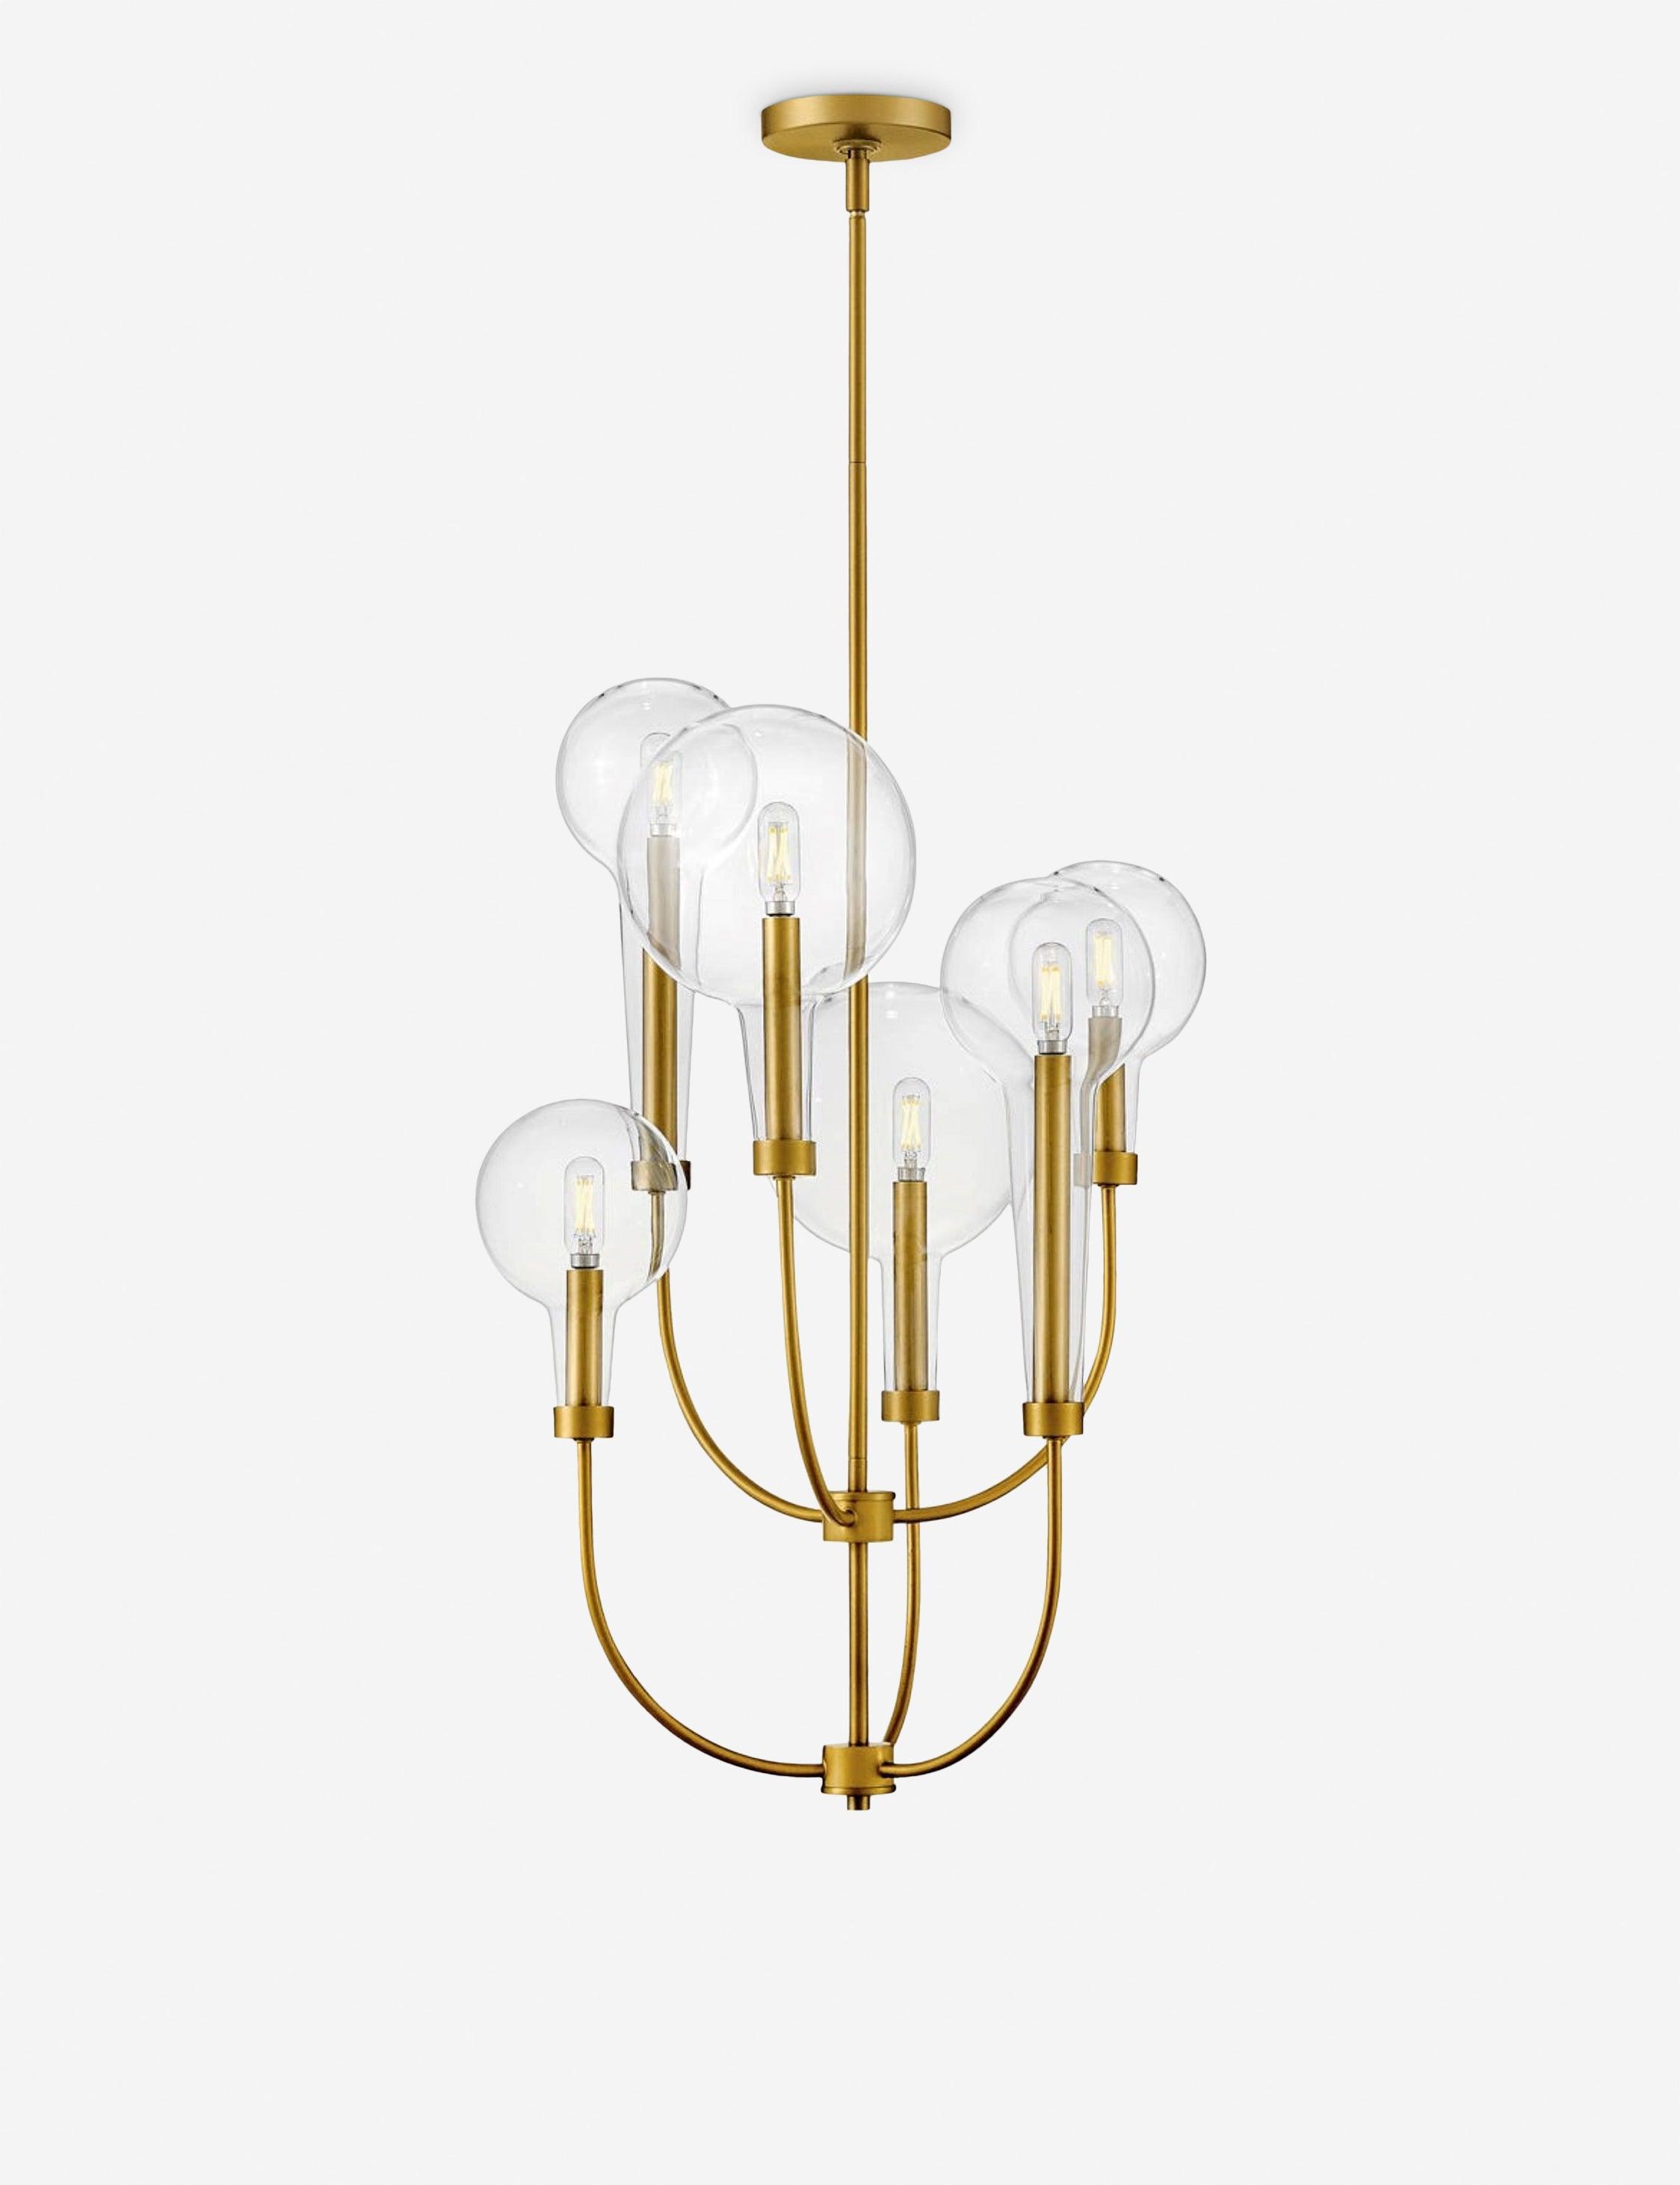 Alchemy 6-Light Lacquered Brass Cage Chandelier with Clear Glass